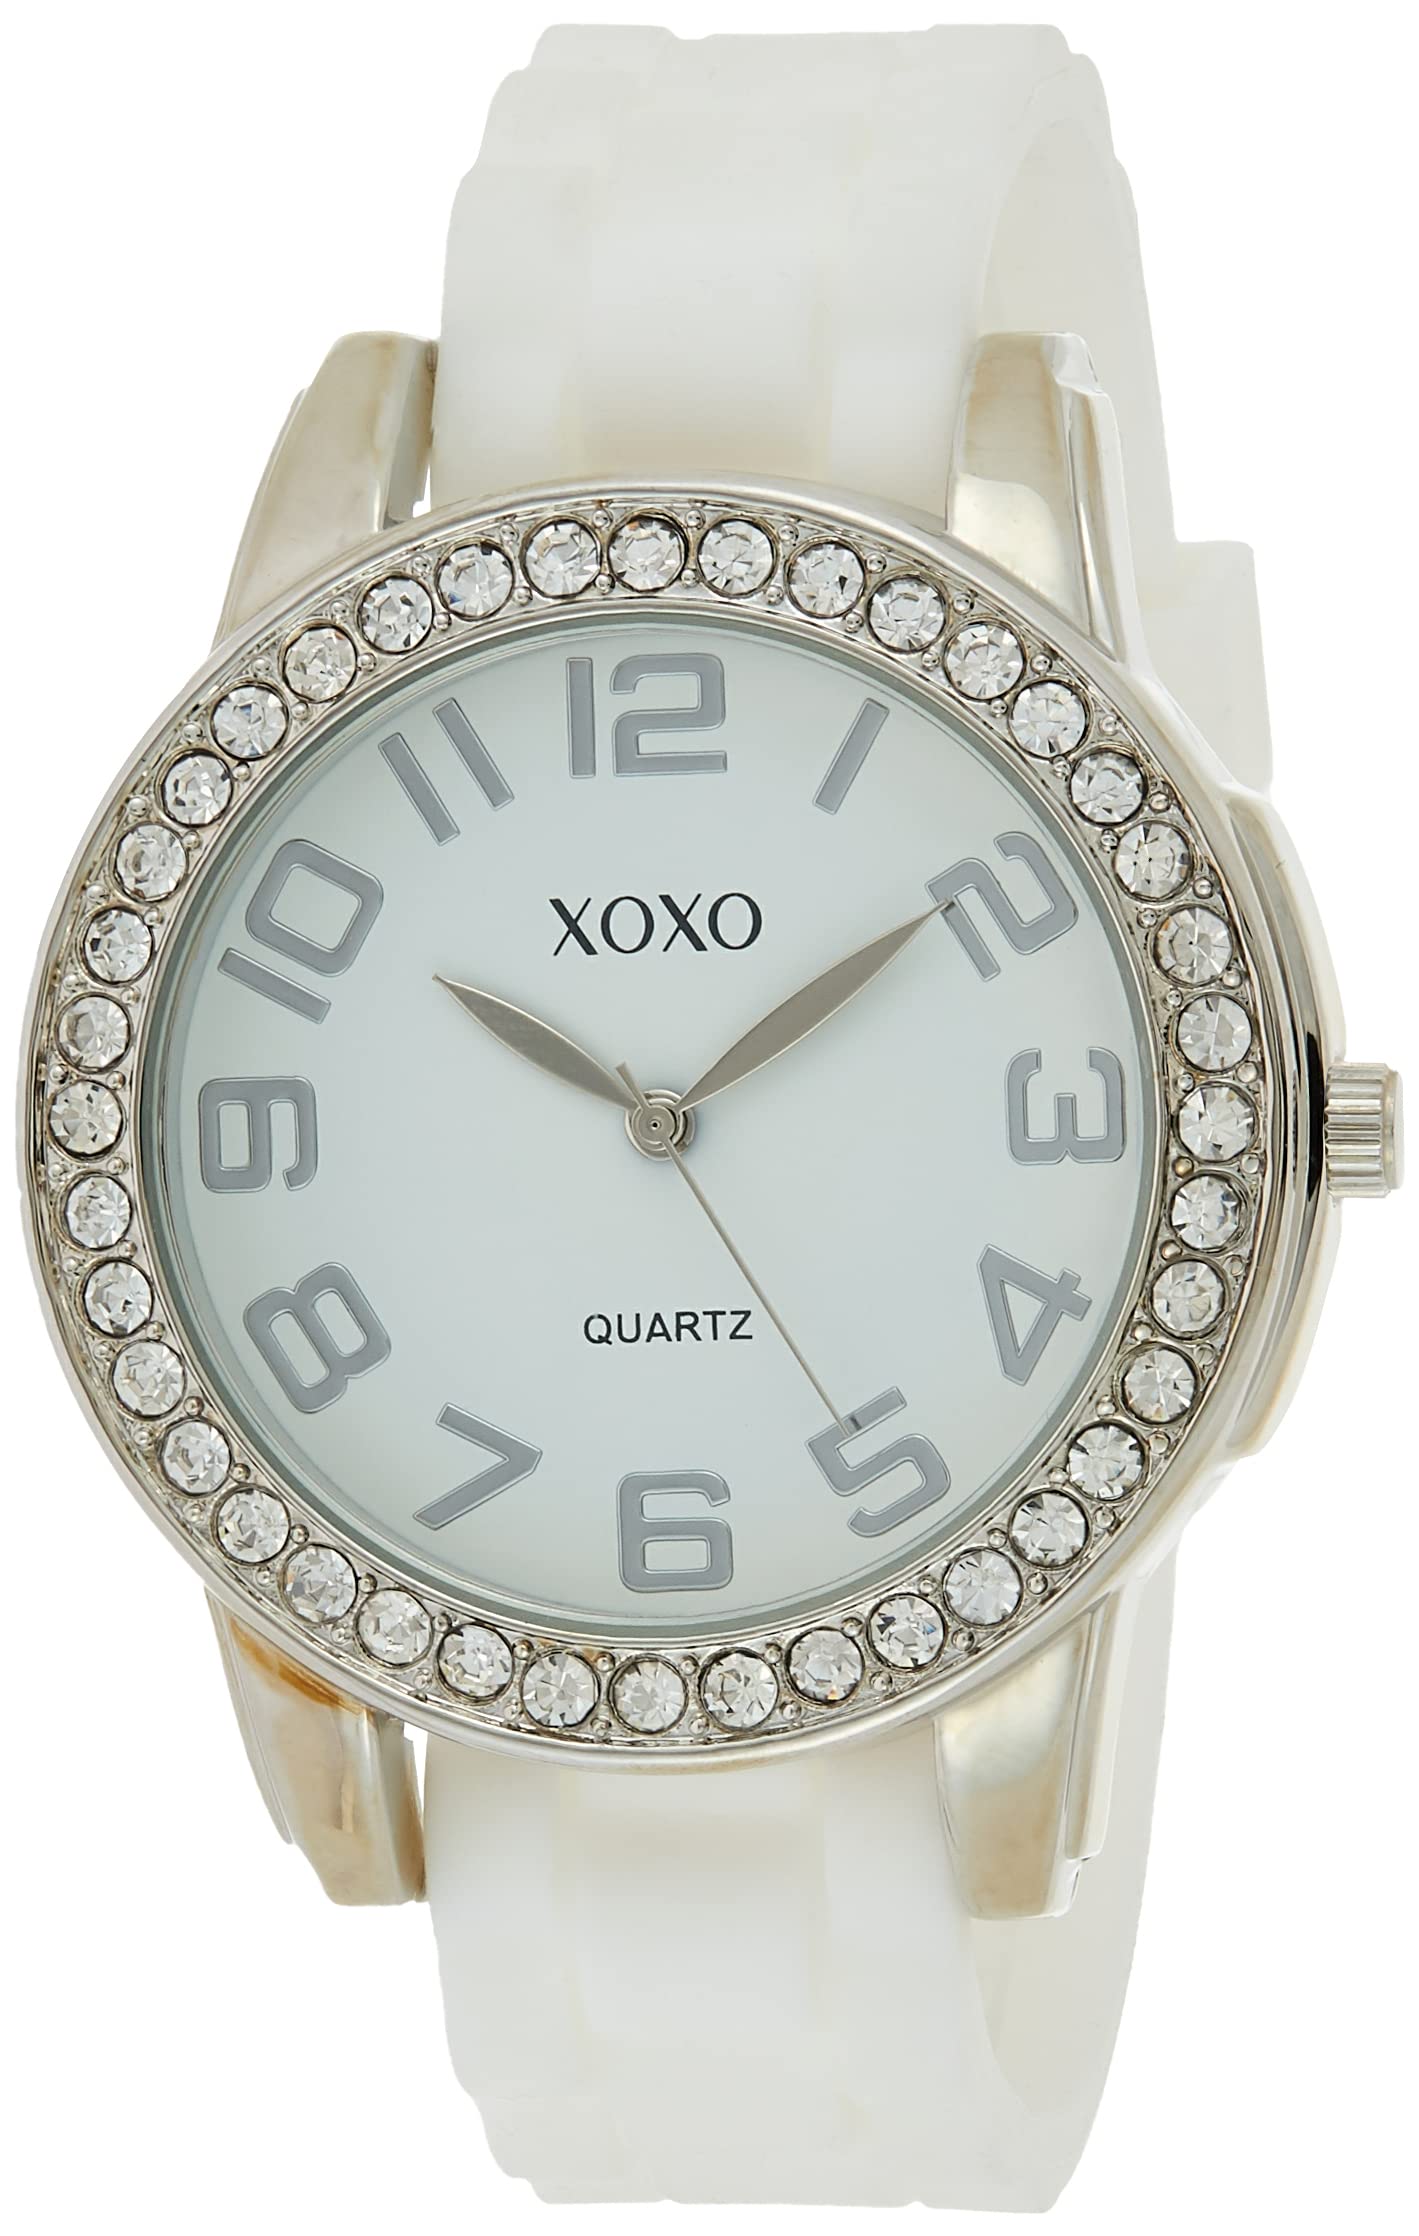 Accutime XOXO Women's Analog Watch with Silver-Tone Case, Crystal-Inset Bezel, 7 Interchangeable Bands Included - Official XOXO Woman's Silver-Tone Watch, Silicone Buckle Straps - Model: XO9069